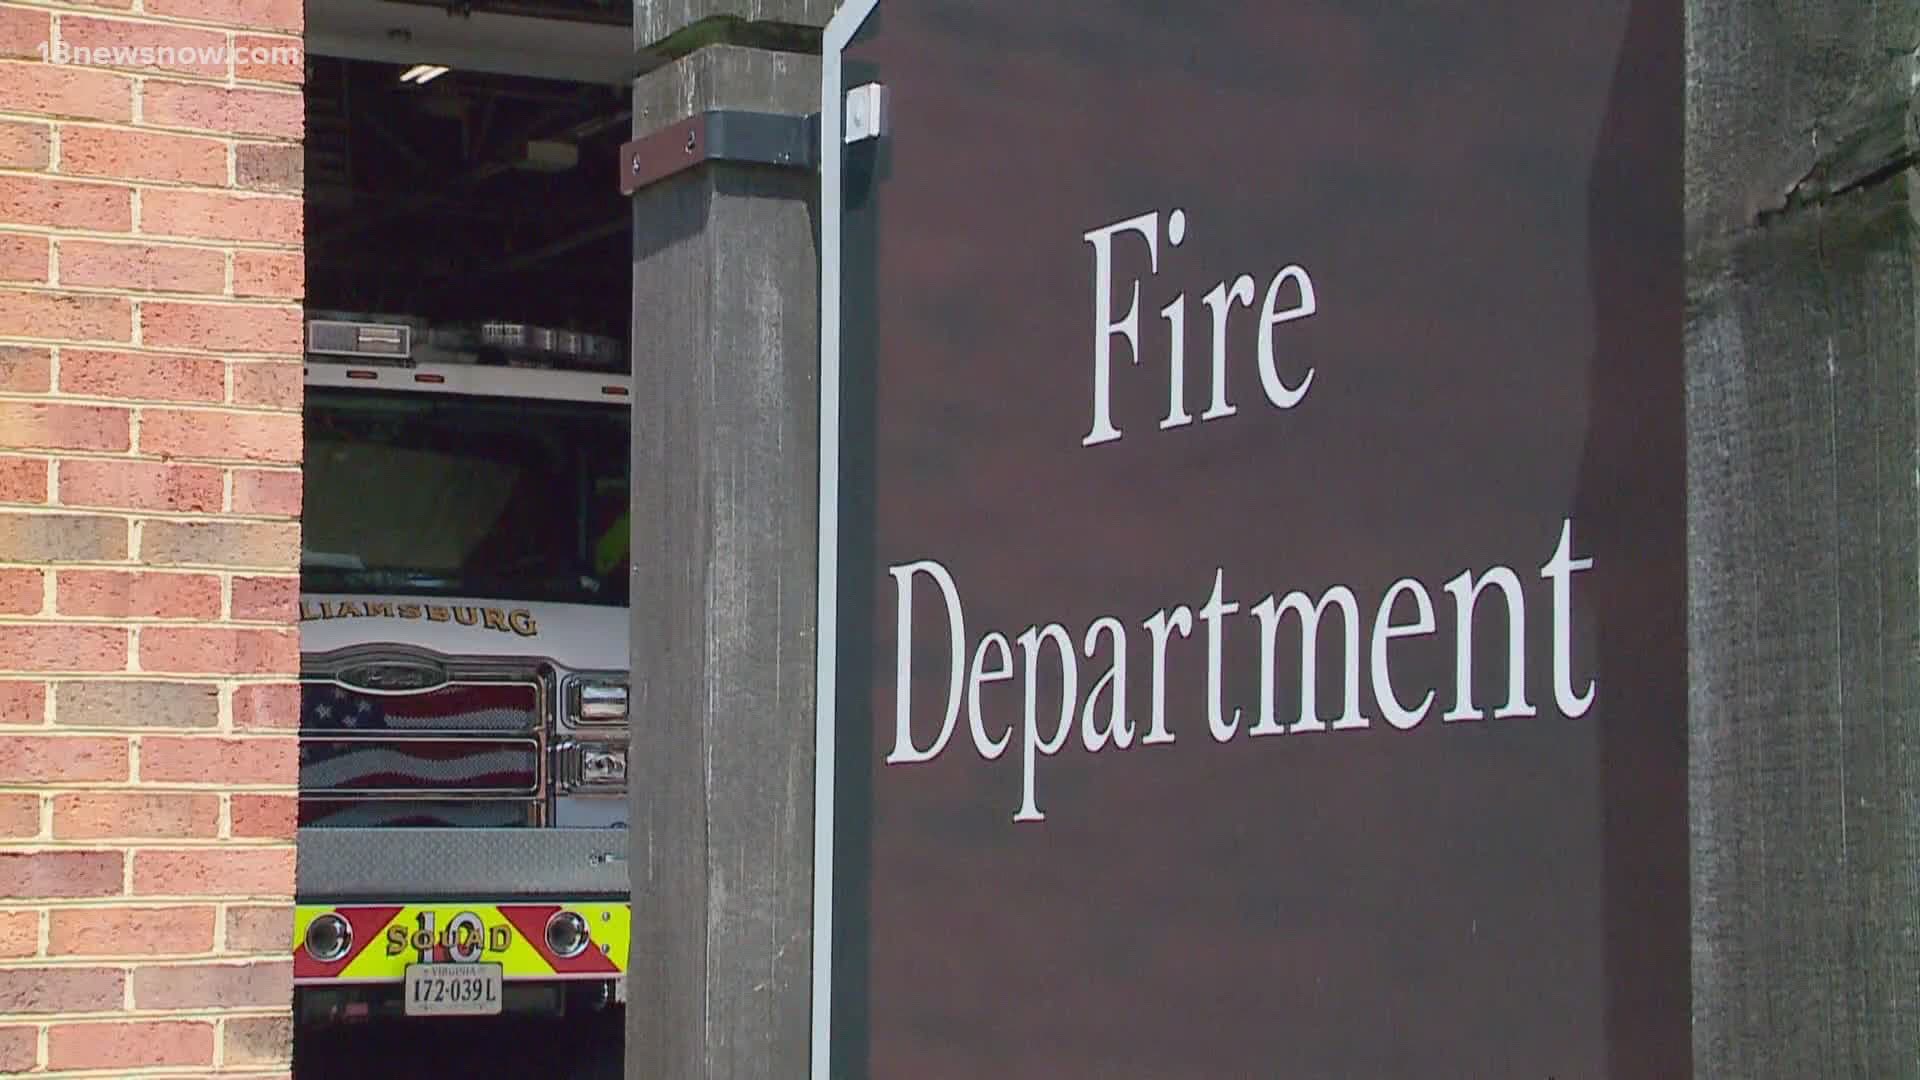 There's a push by first responders on the Peninsula to get a second fire station in their area, and they say it could make the difference between life and death.